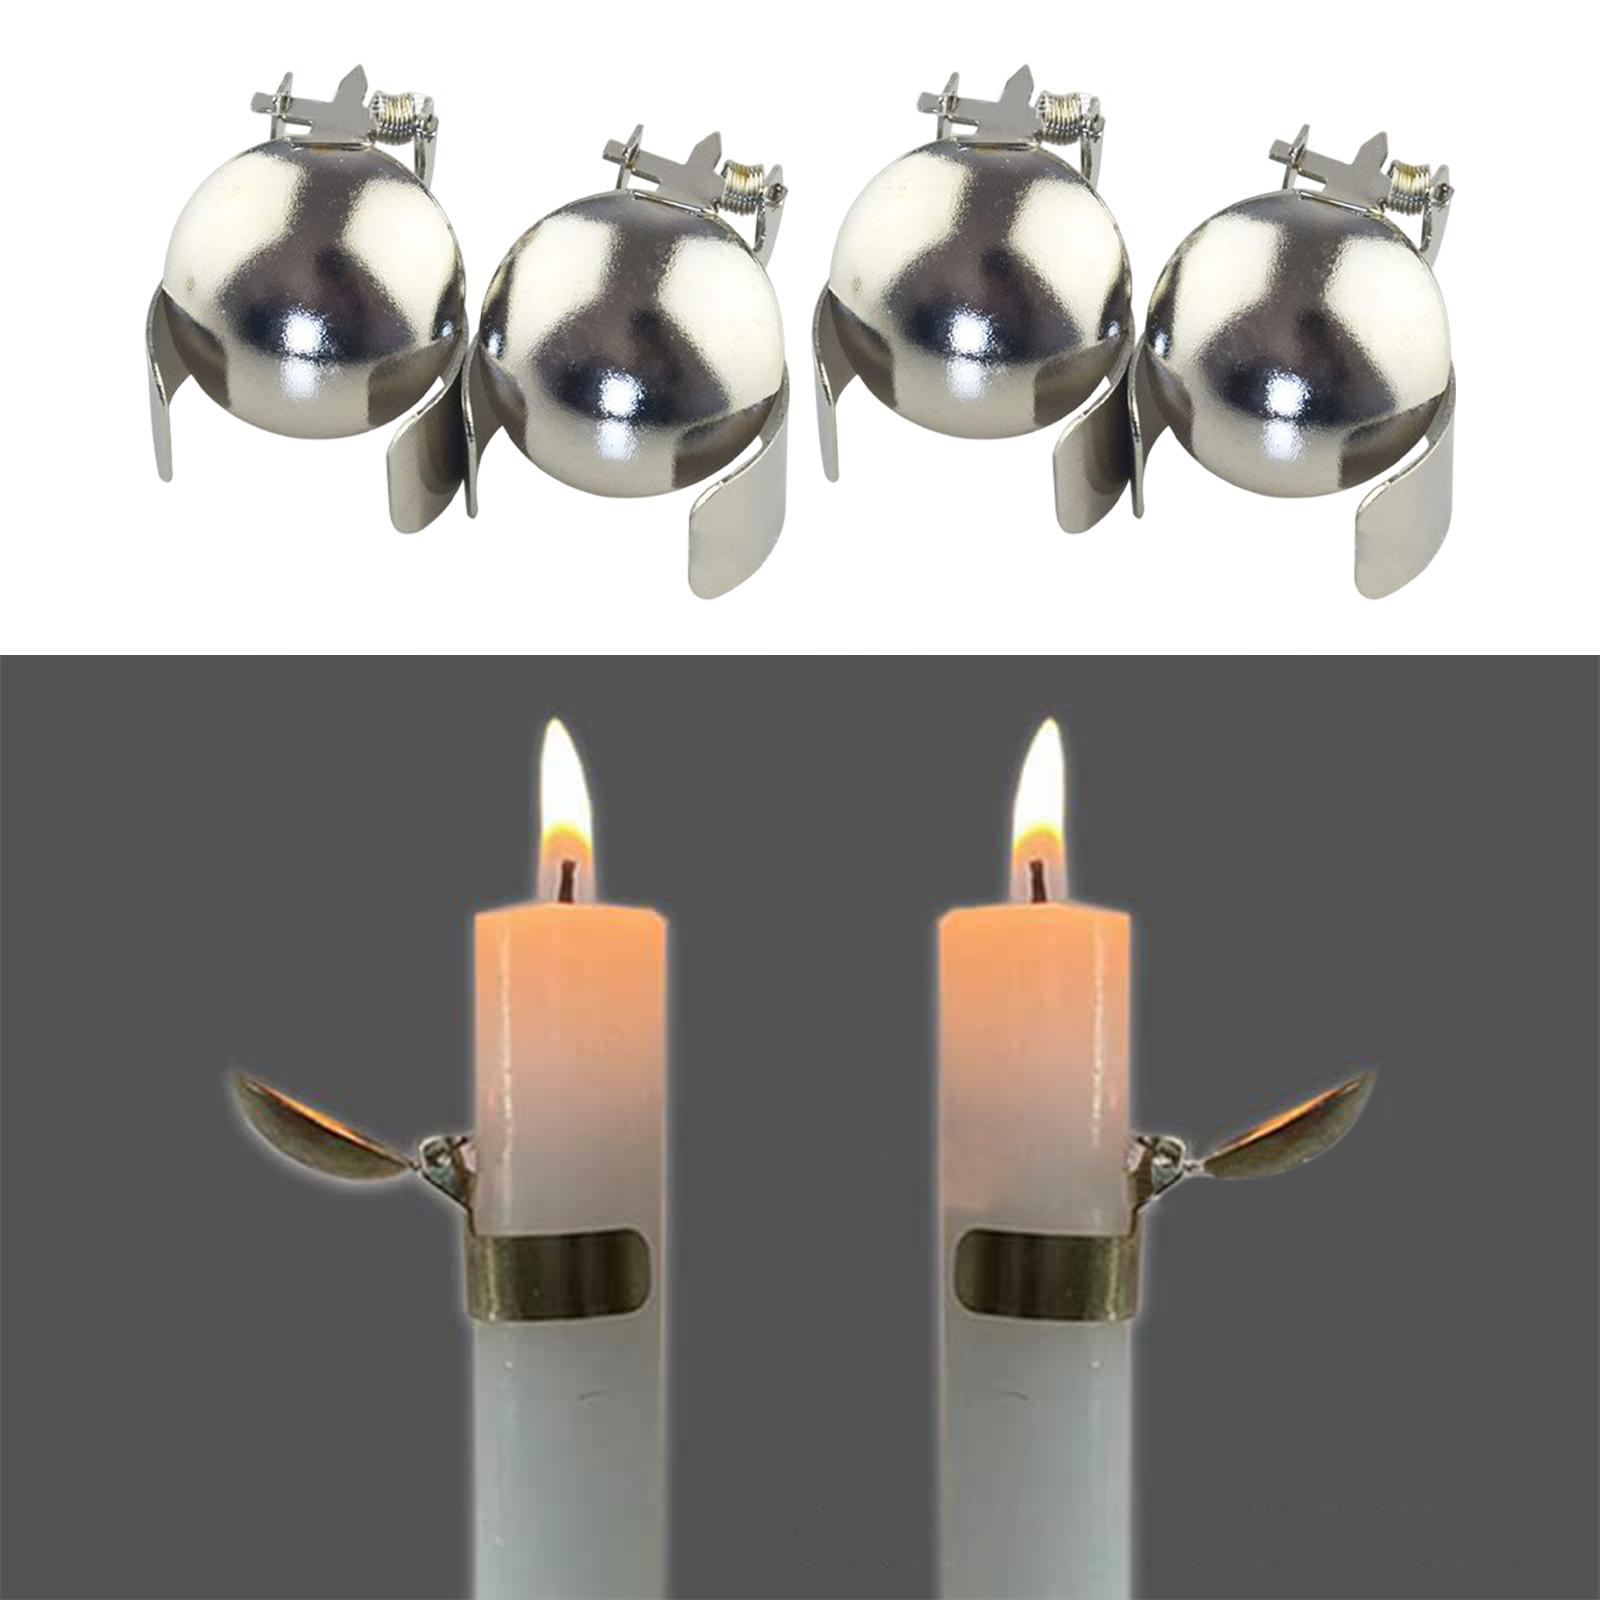 4Pcs Metal Automatic Candle Snuffer for Bedroom Home Candle Accessories Argent